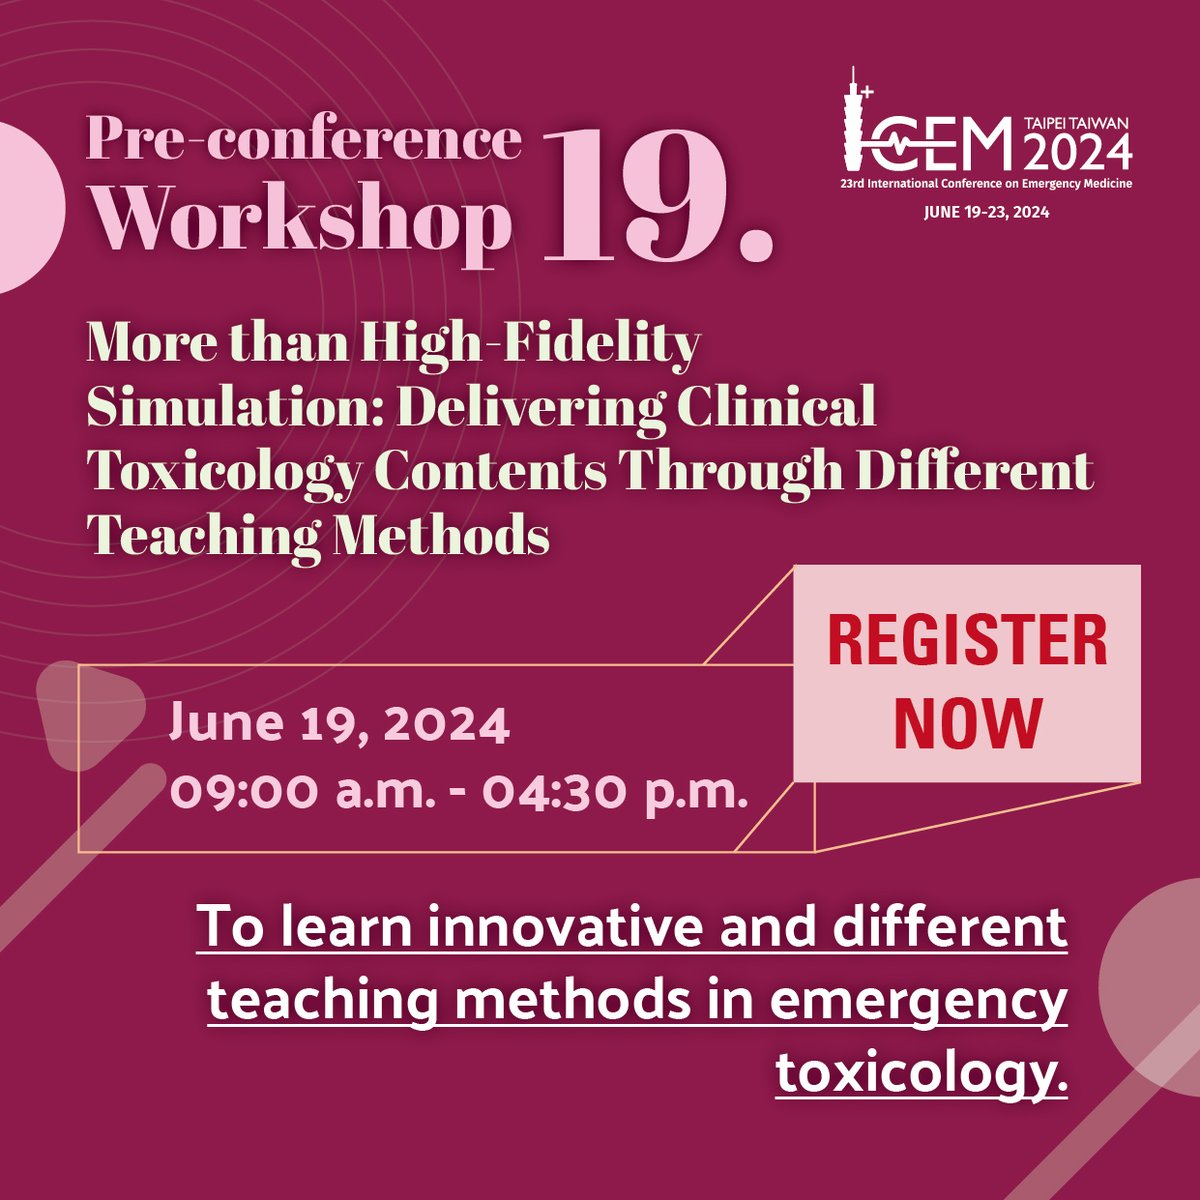 Calling all emergency medicine professionals! Elevate your skills with our preconference workshops designed to sharpen your clinical expertise and enhance patient care. Learn more and register: icem2024.com/pre-conference